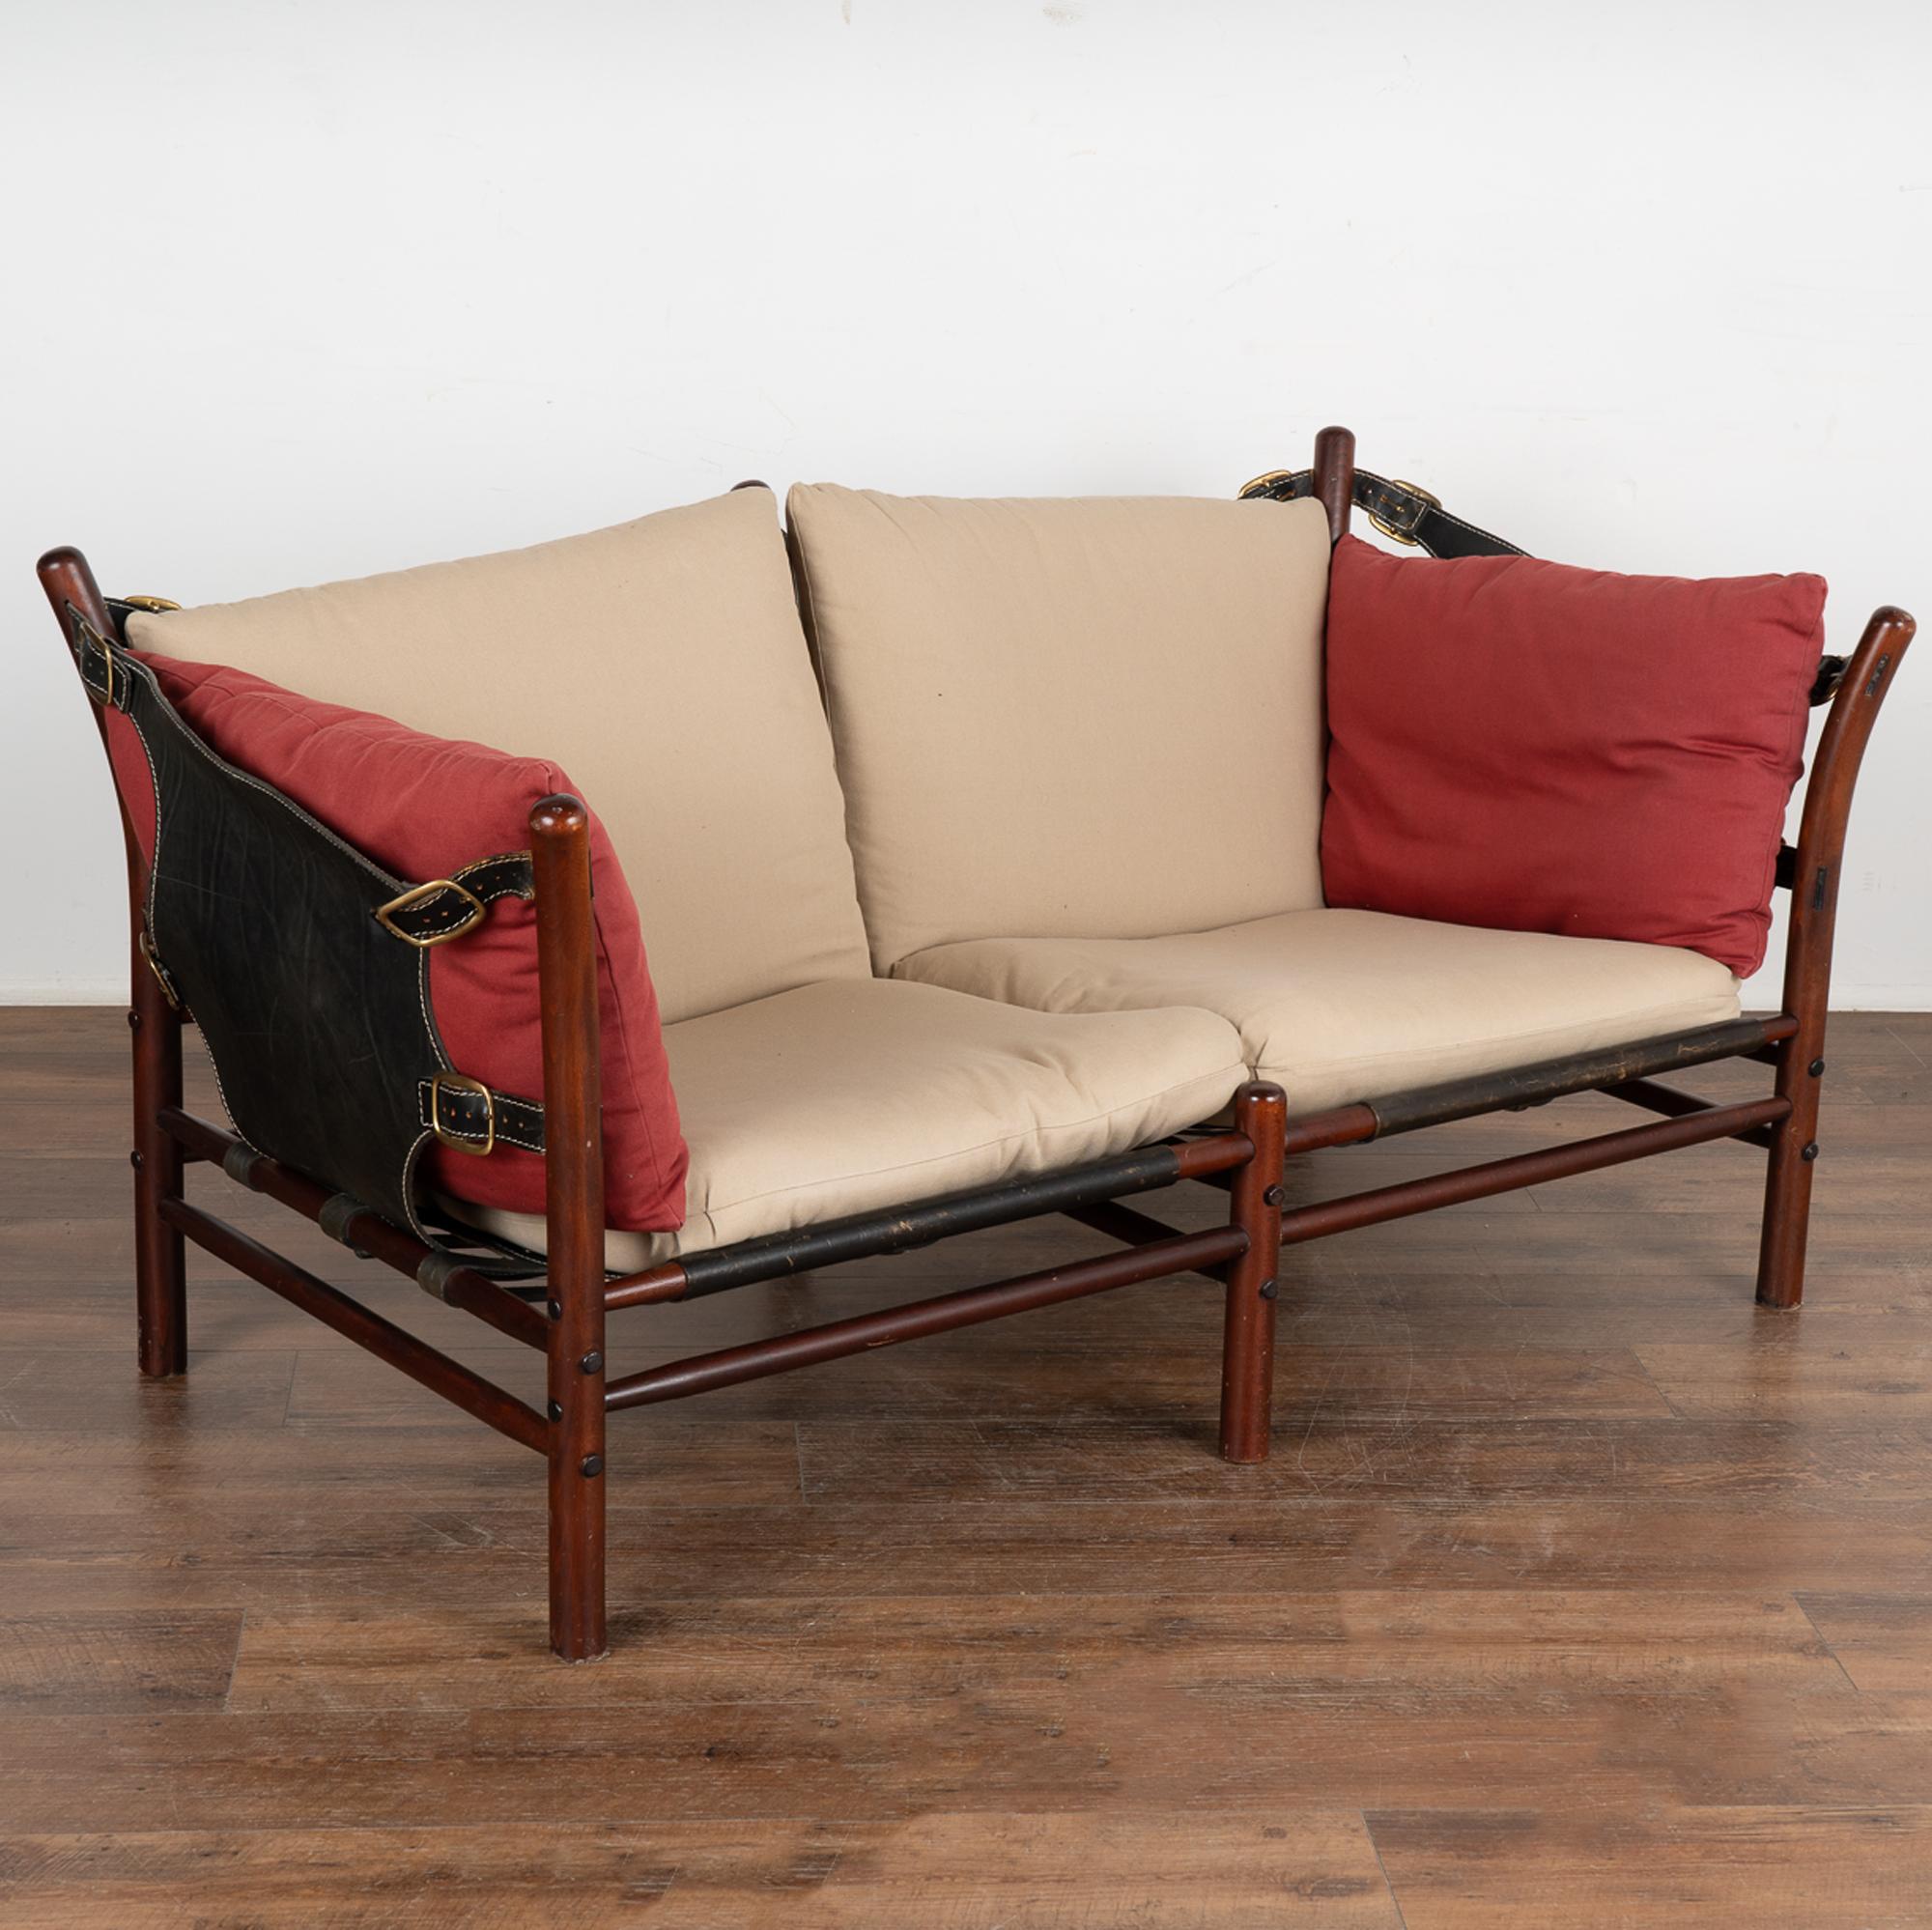 Mid-Century Modern two-person sofa designed by Arne Norell. Leather sling sides and back, loose cushions are covered in neutral and contrasting brick red fabric. The Illona model was inspired by safari furniture and manufactured by Aneby